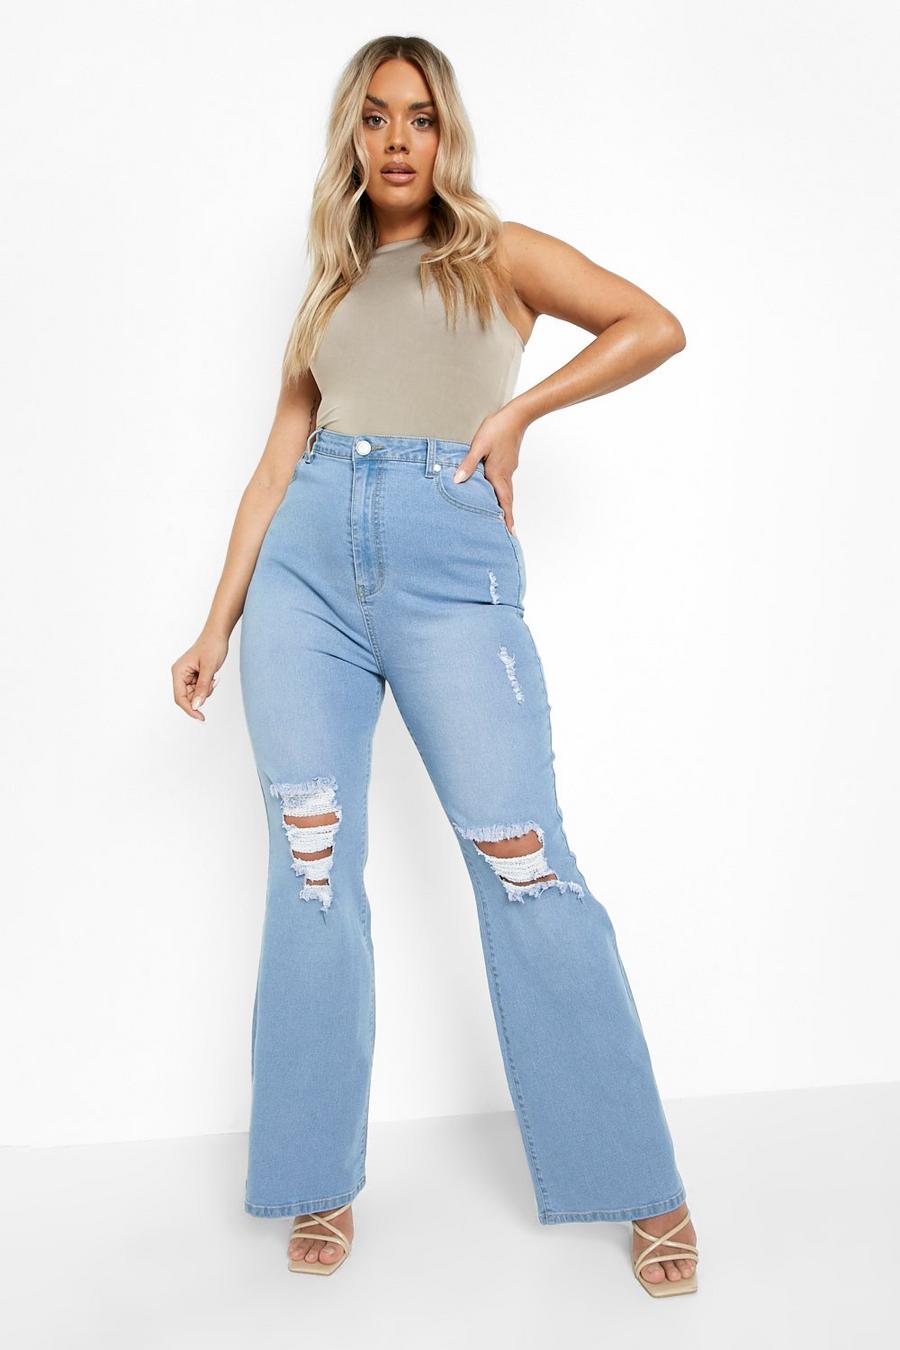 The Ultimate Plus Size Jeans Fit and Style Guide  Curvy fashionista, Plus  size jeans, Best plus size jeans